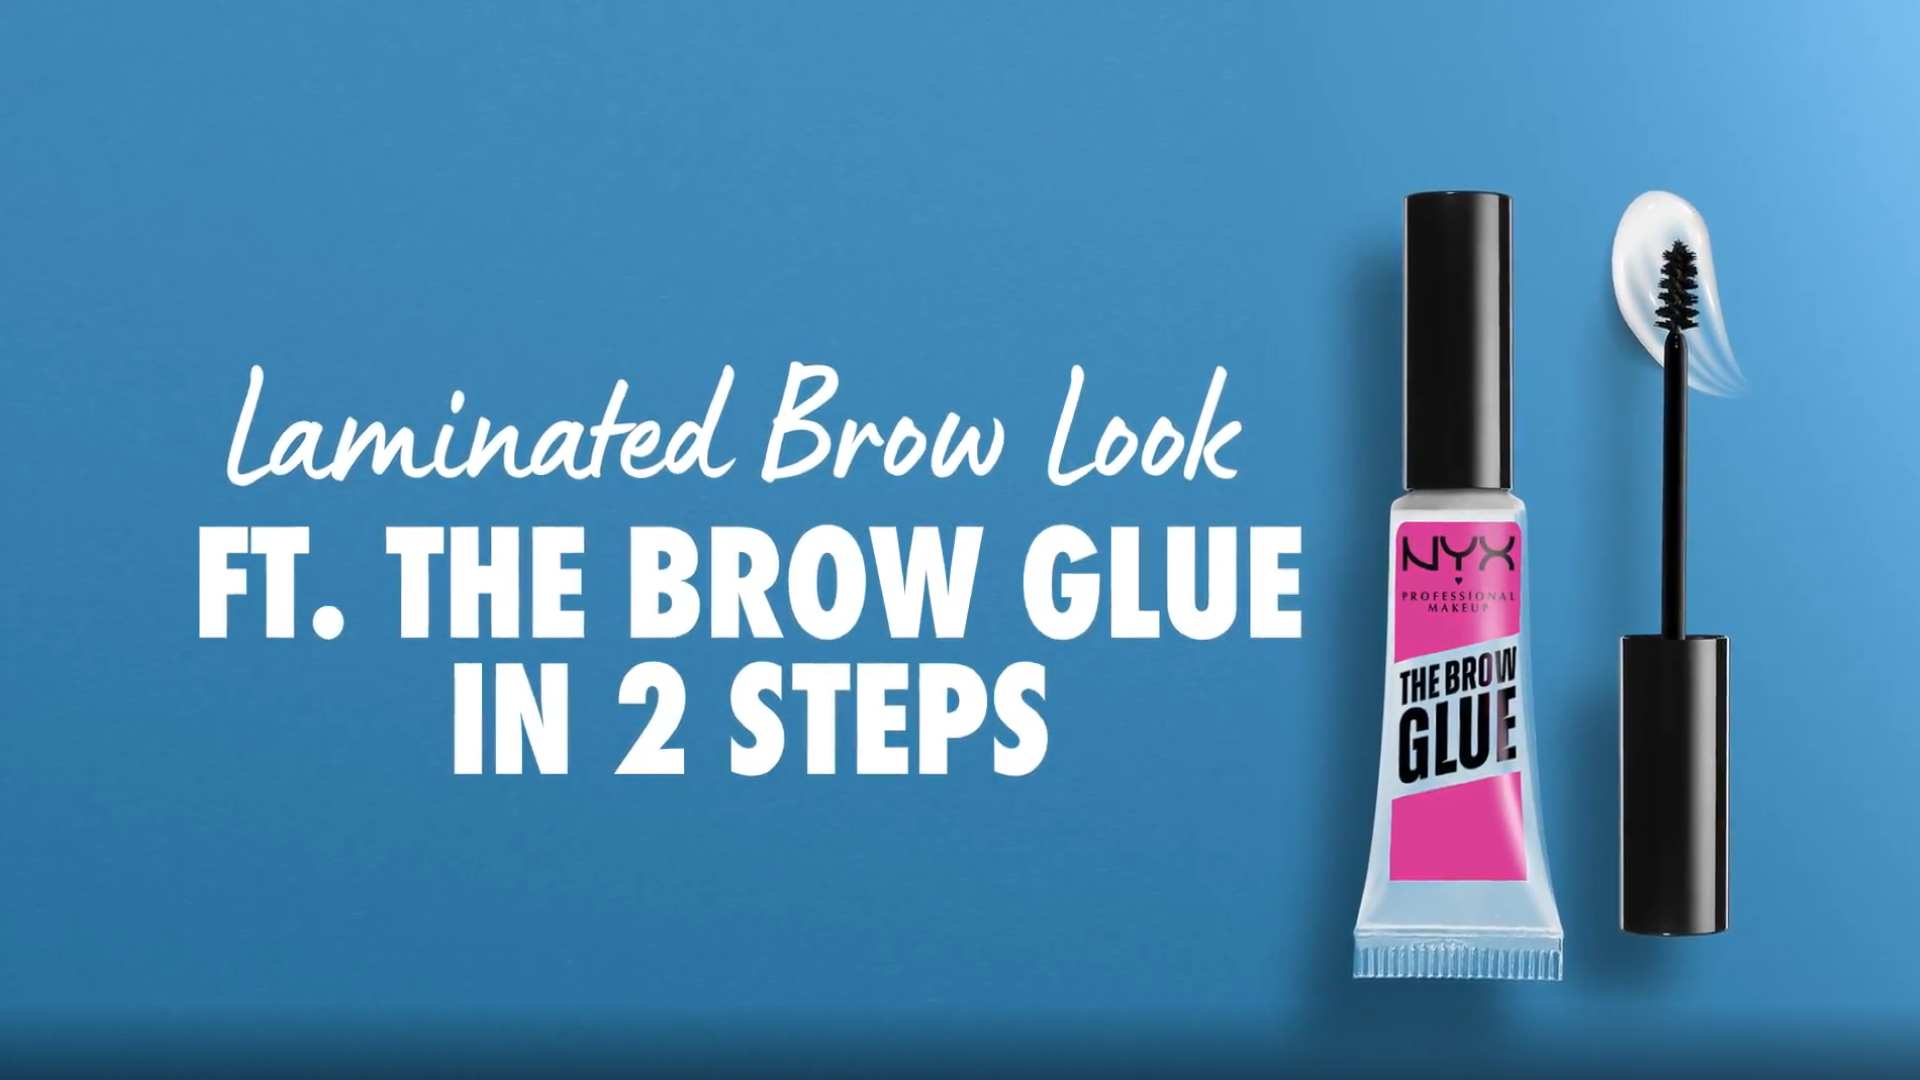 Glue, Hold Extreme Gel, Eyebrow Clear Brow Makeup NYX Professional